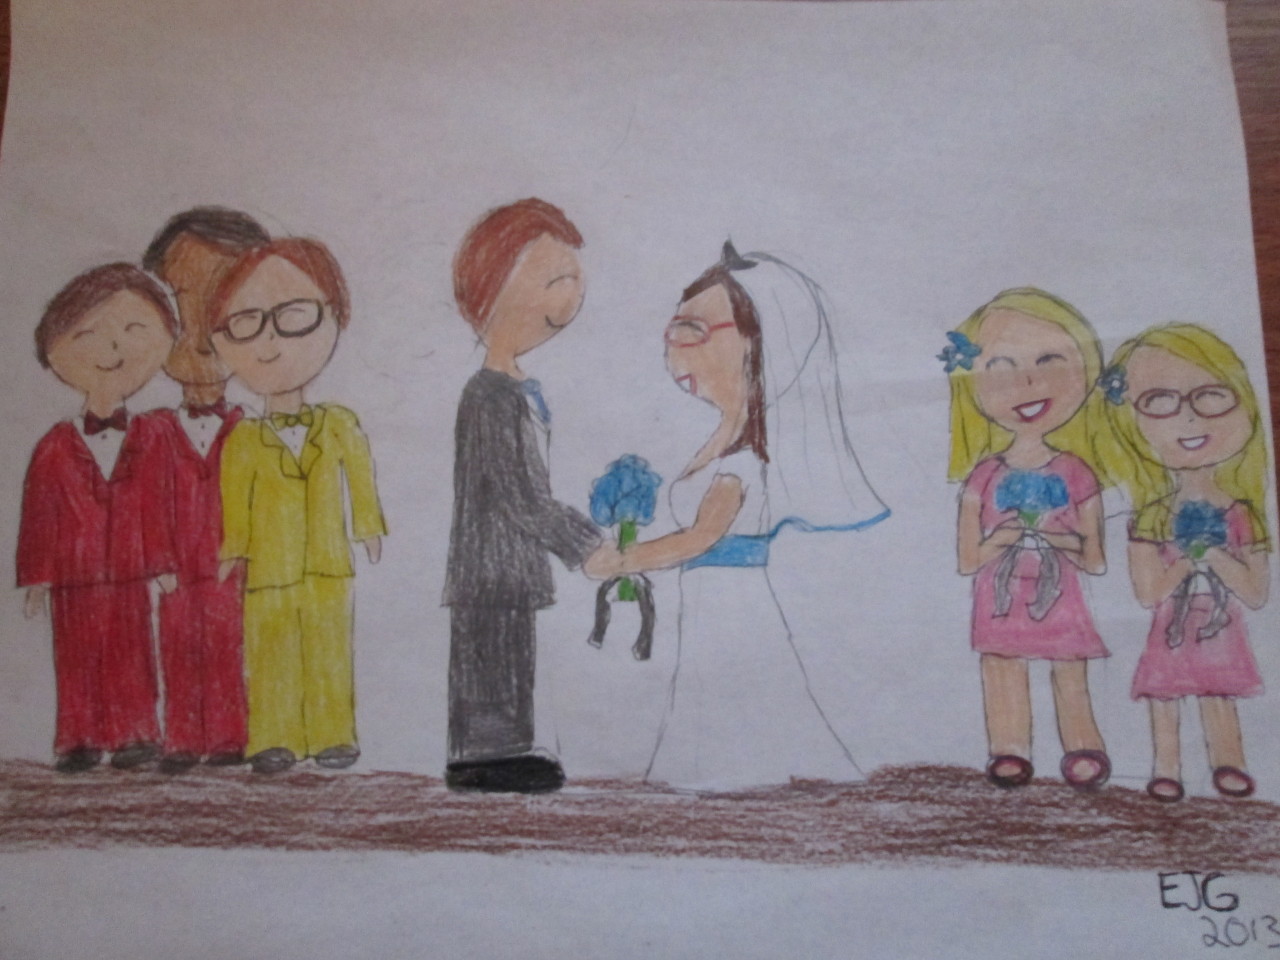 longlivetheshamy:
“ cuddleslittlevixen:
“ A quick little chibi Shamy wedding I drew for Jacey :)
”
Leonard in command gold! I could totally see Sheldon insisting! T.T
”
I hope that when the big bang theory ends (I don’t want it to end anytime soon!),...